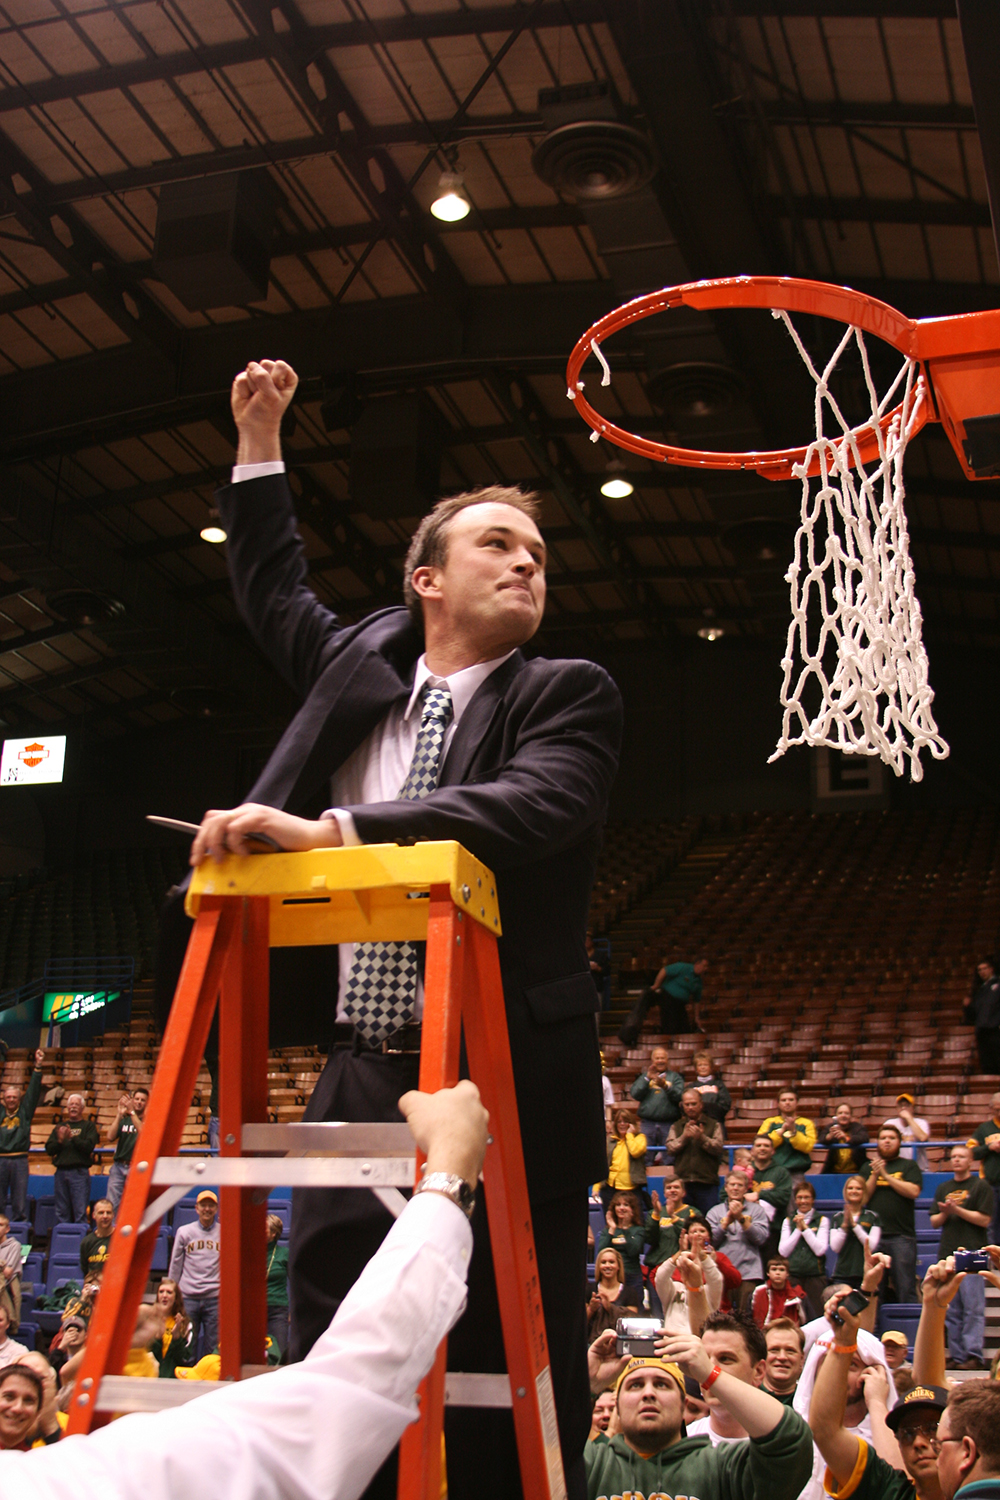 Saul Phillips pumps his fist towards the crowd as he cuts down the net at the Sioux Falls Arena in 2009.